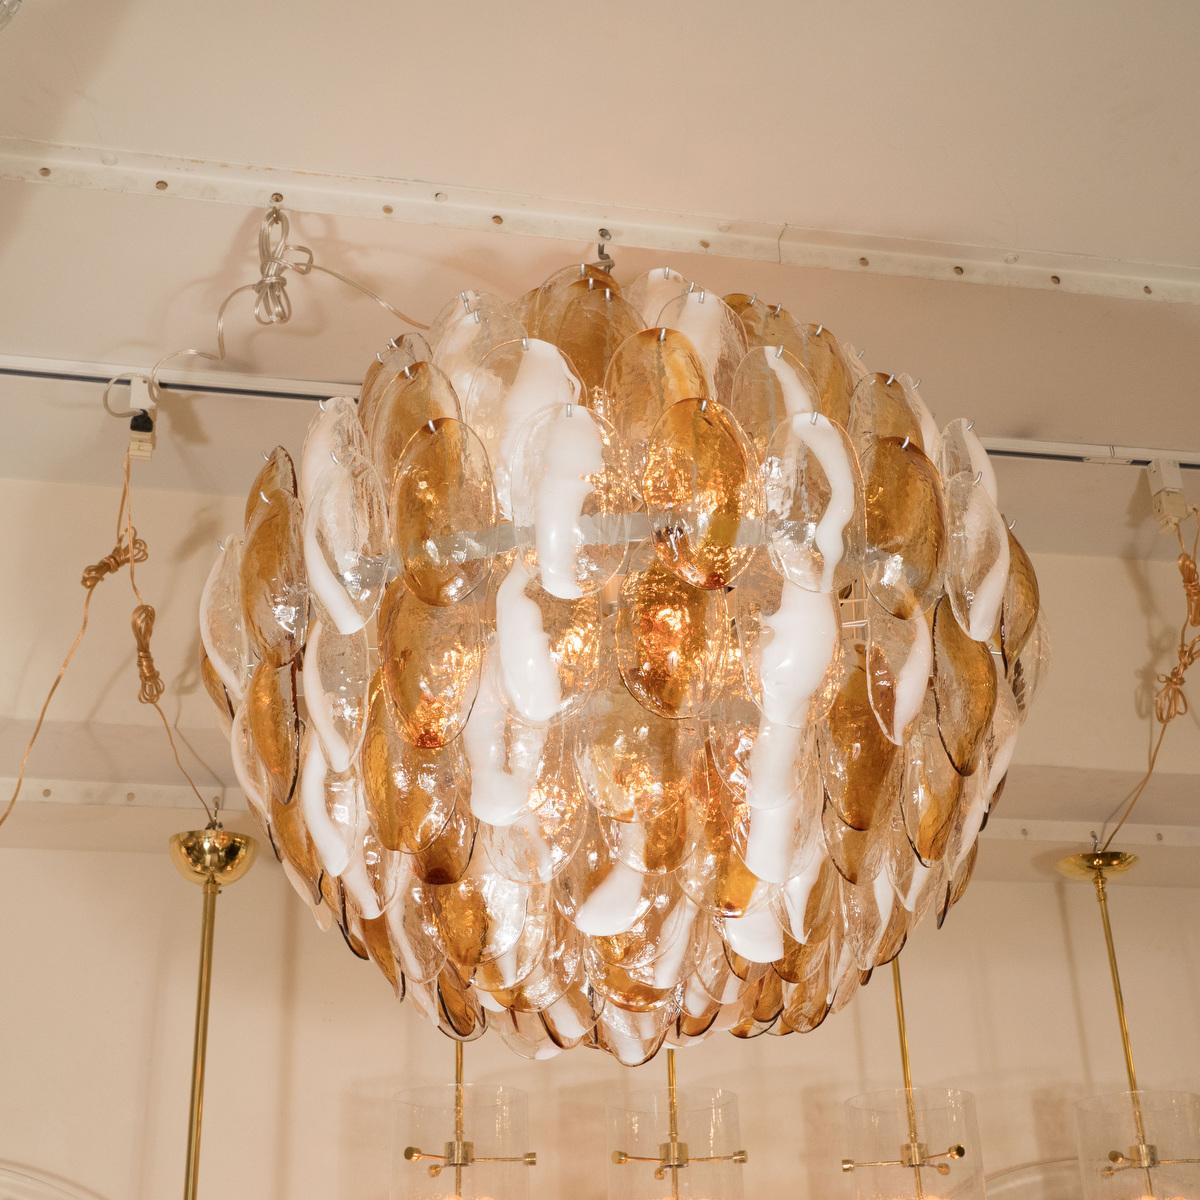 Multilayered chandelier composed of oval amber, frosted and clear glass elements by Mazzega.